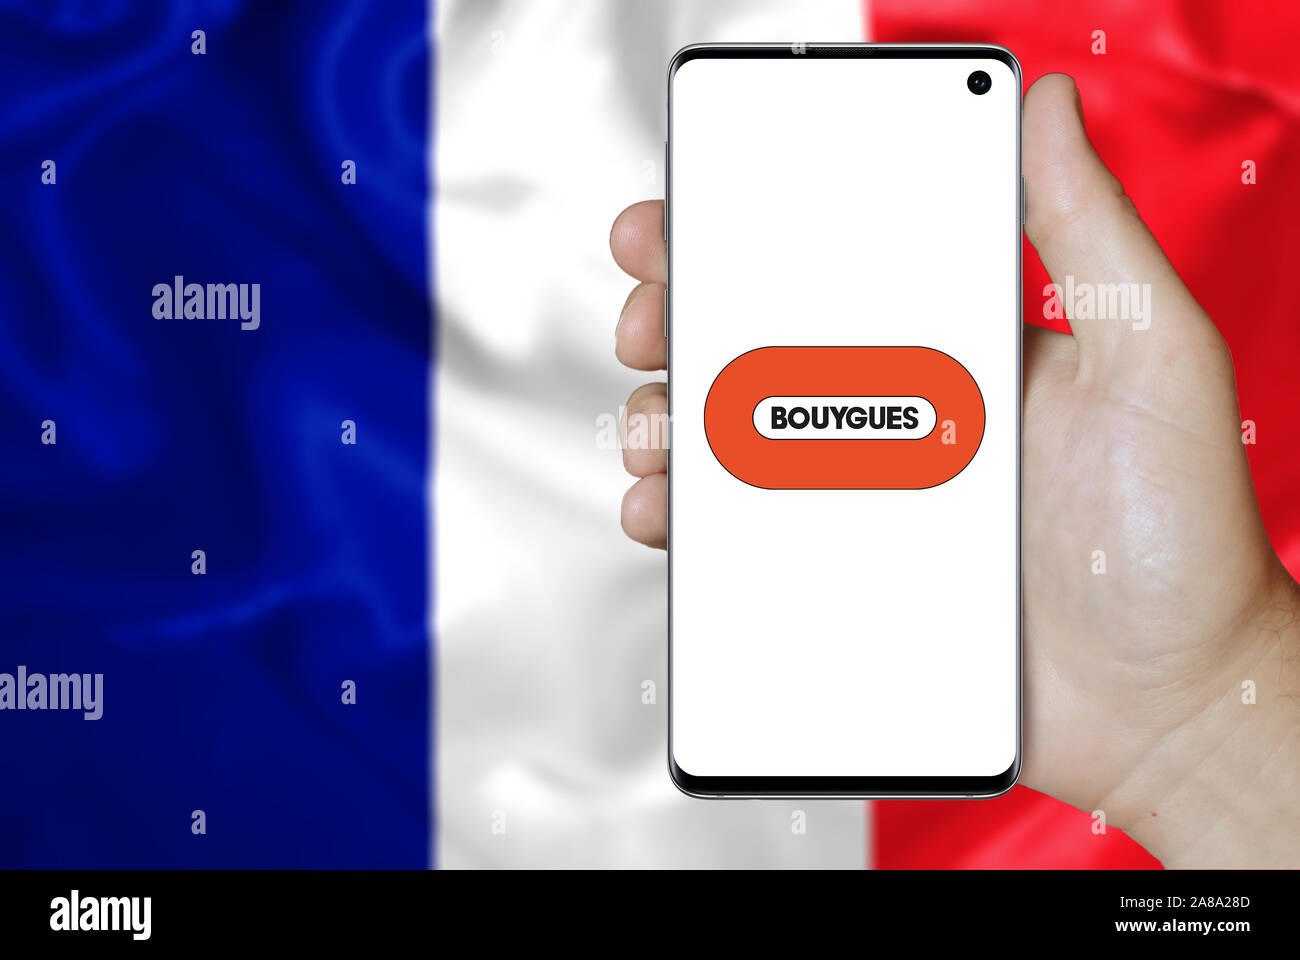 Logo of public company Bouygues displayed on a smartphone. Flag of France background. Credit: PIXDUCE Stock Photo